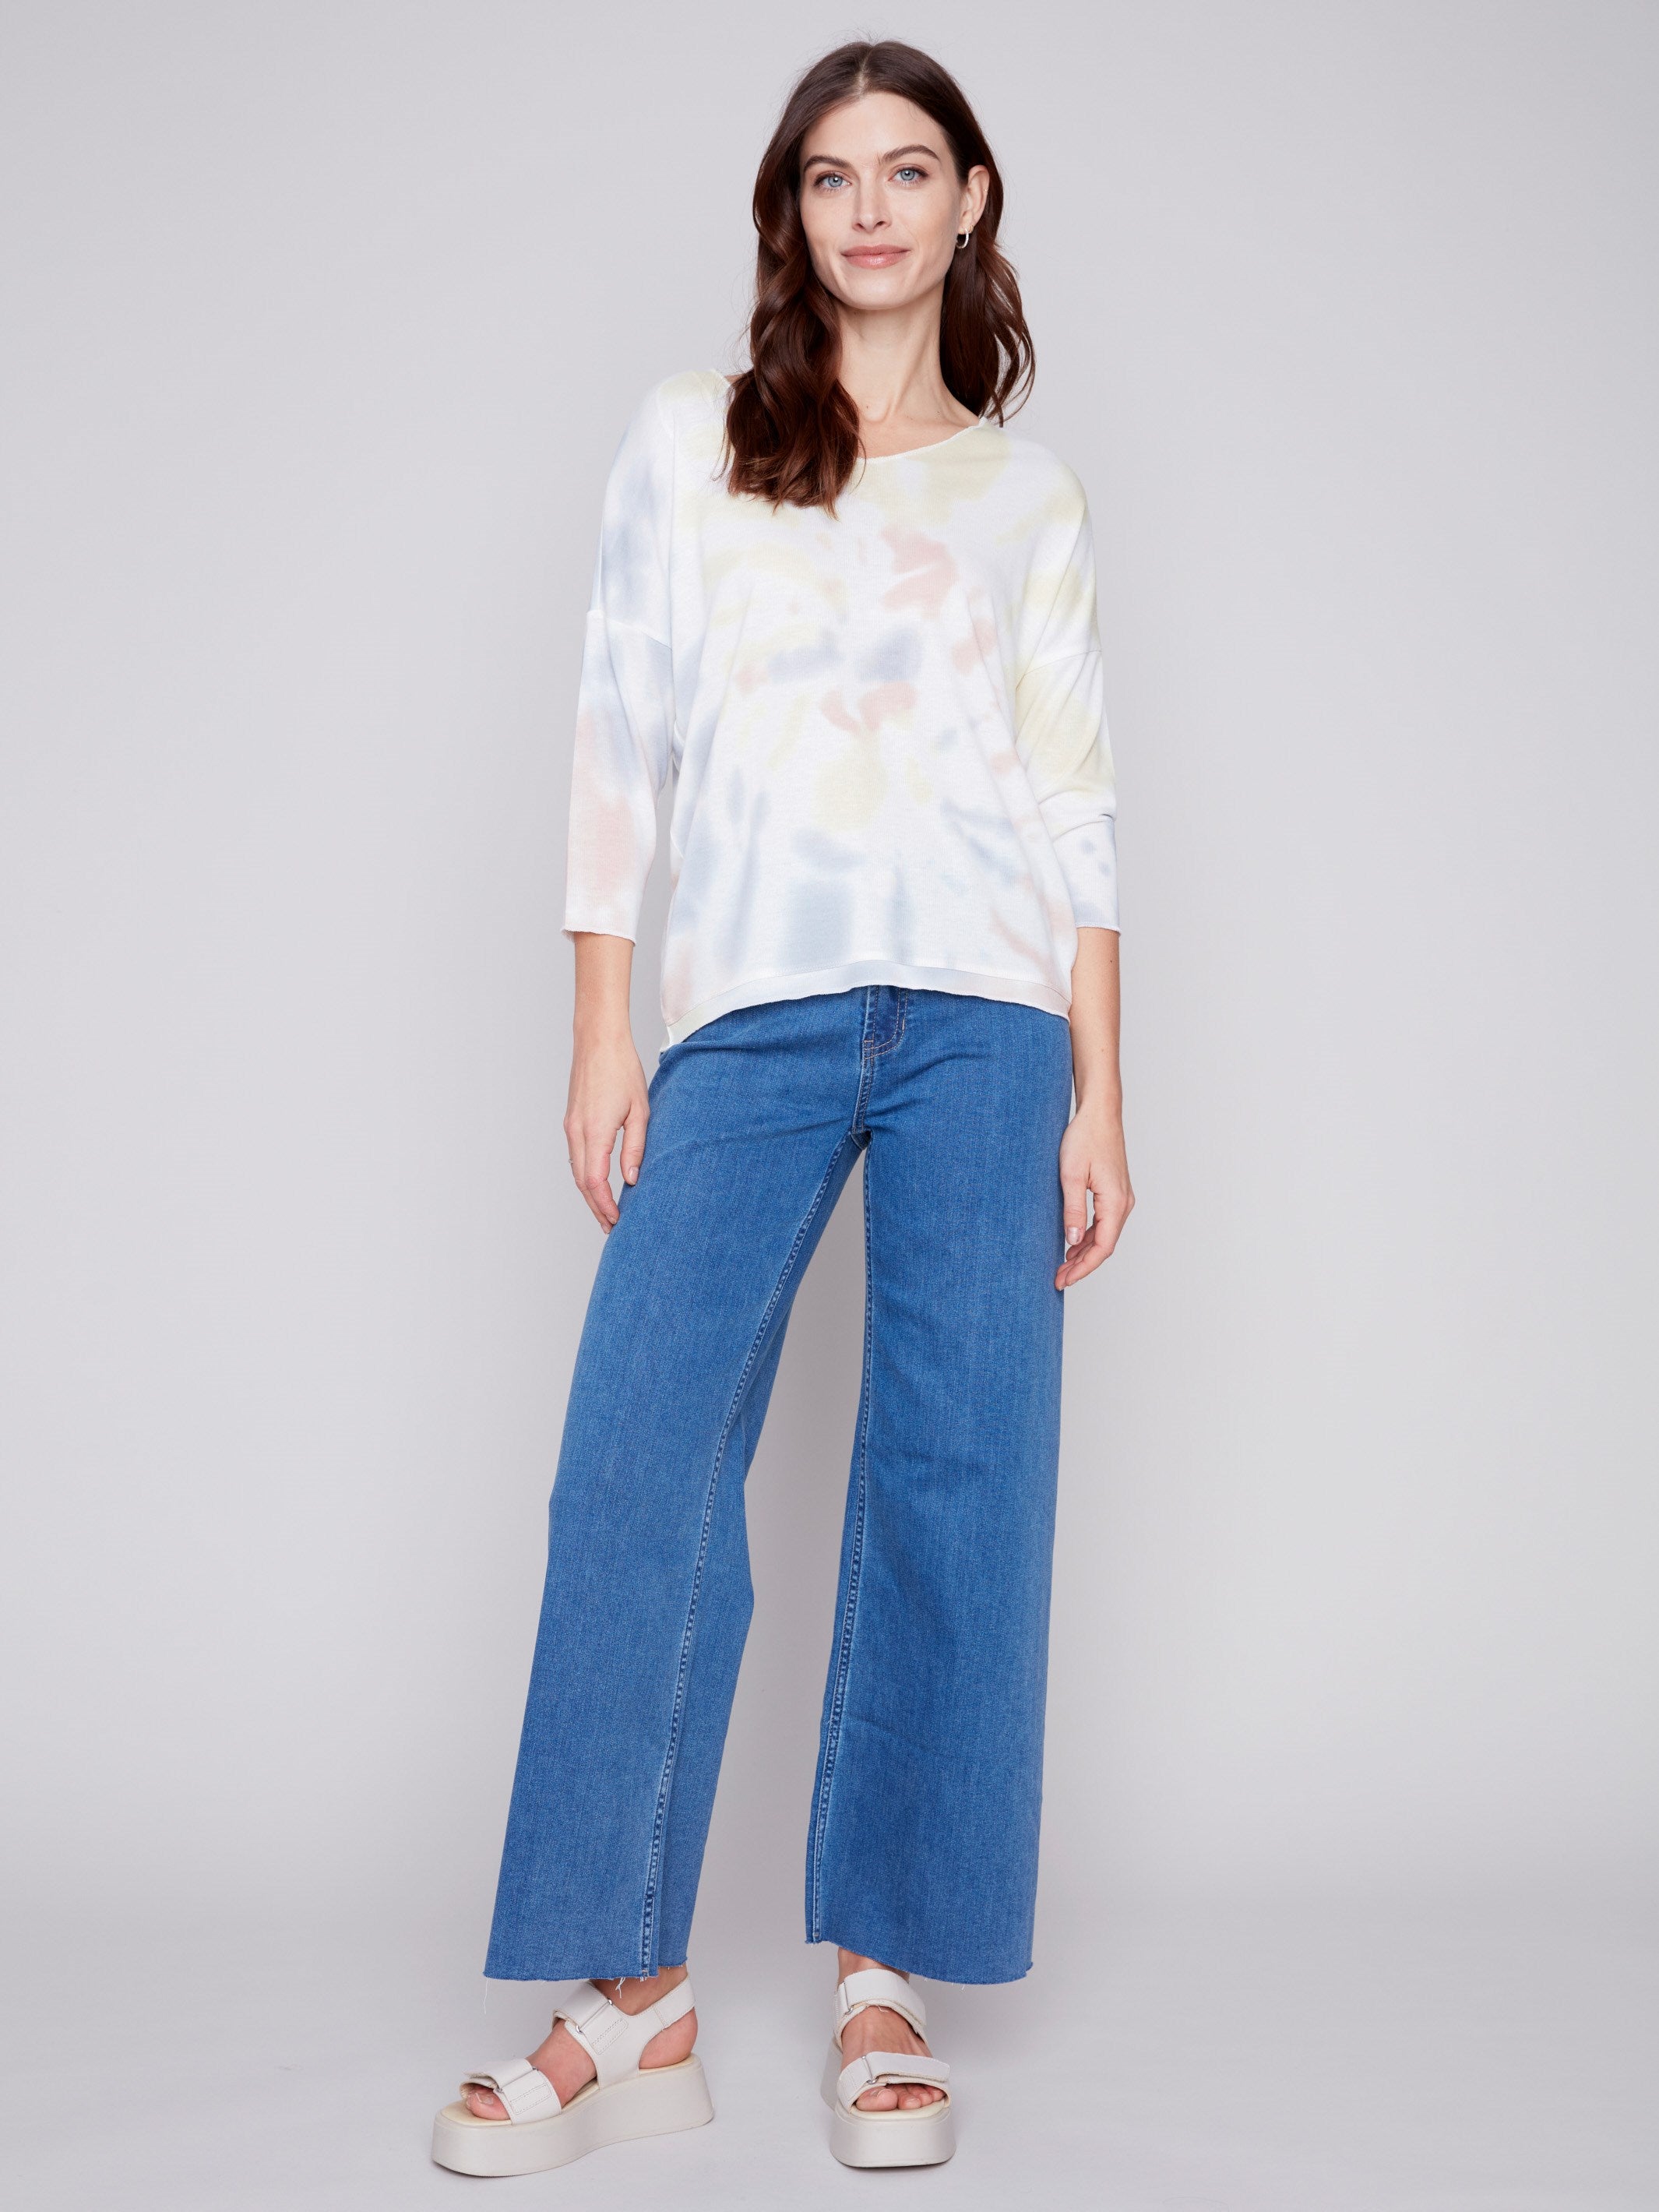 Tie Dye V-Neck Knit Top - Tulip - Charlie B Collection Canada - Image 3